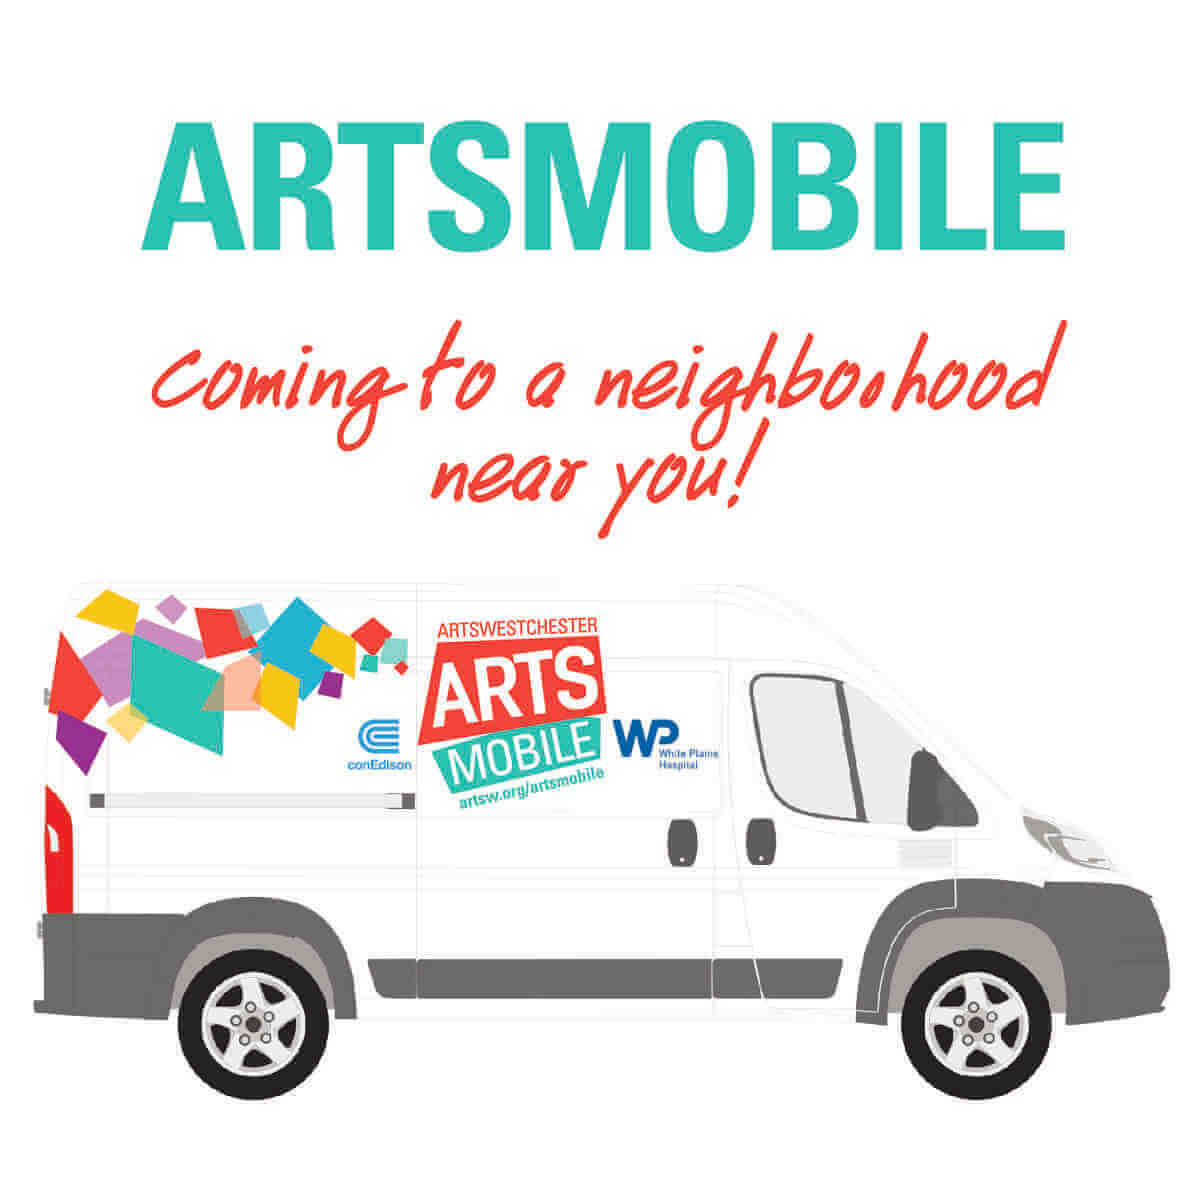 Have You Seen the ArtsMobile?